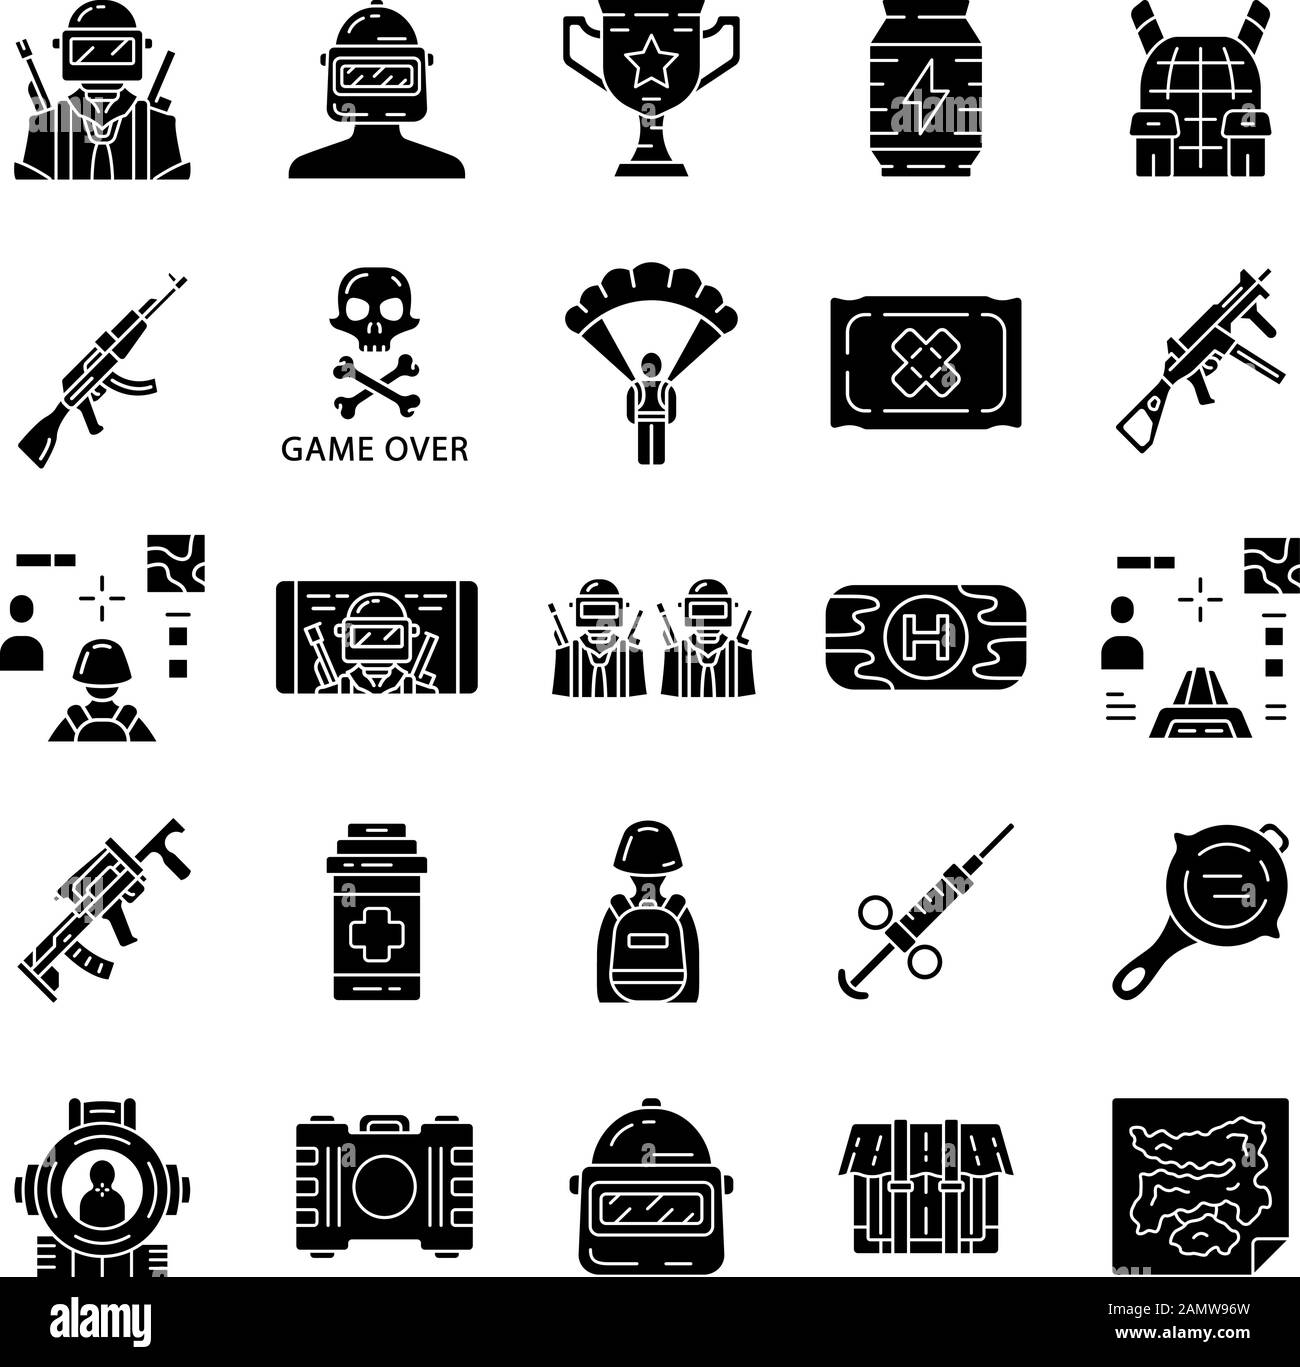 Multiplayer - Free gaming icons